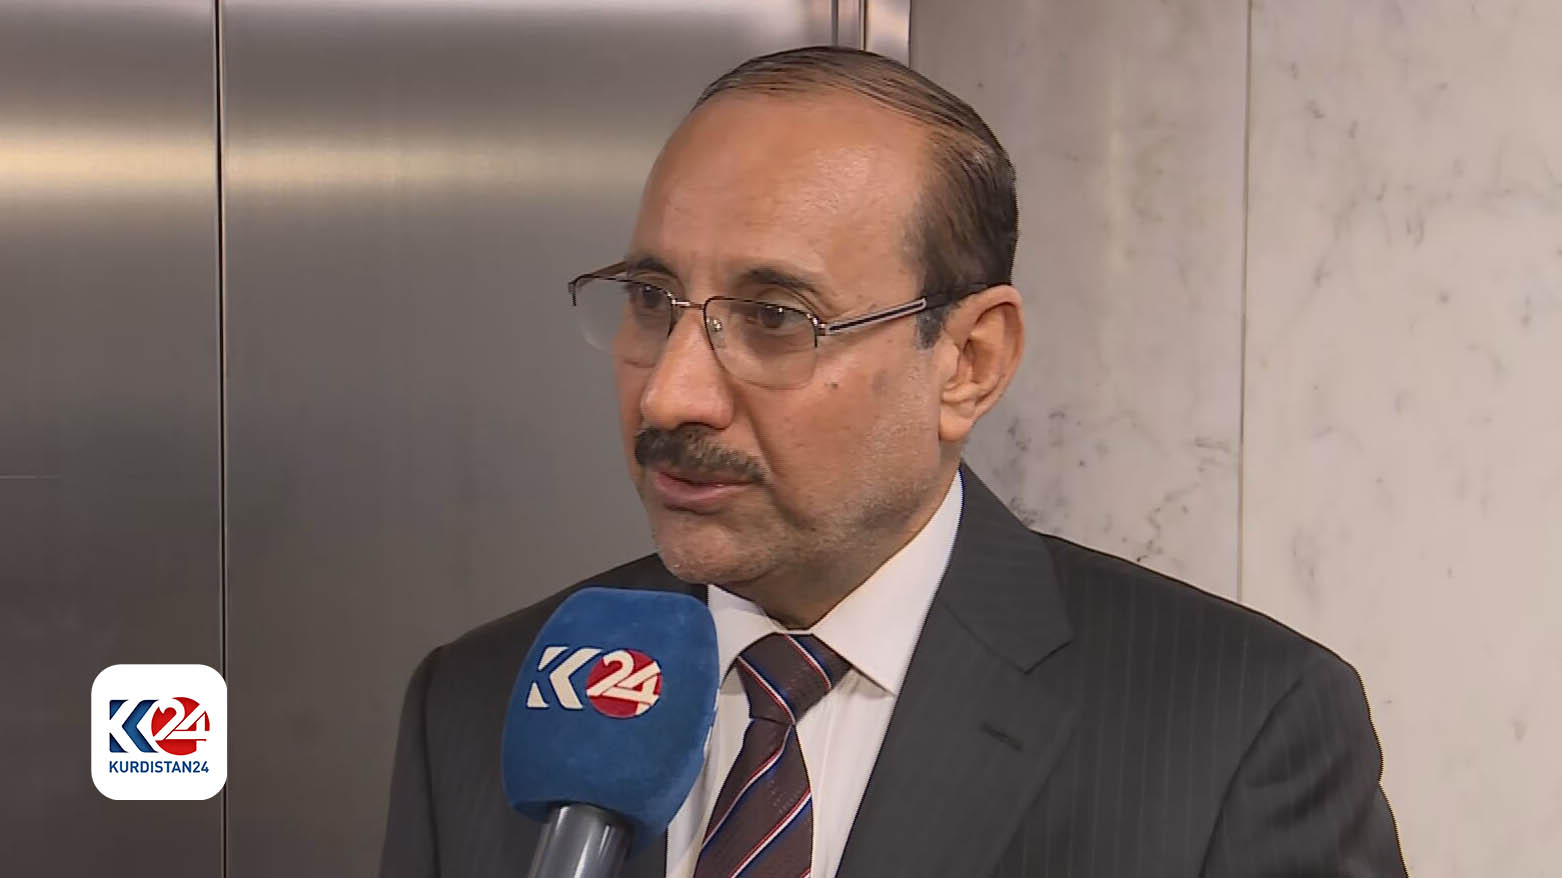 Kurdistan Region financial entitlements should be remitted says head of Iraqi parliaments finance committee